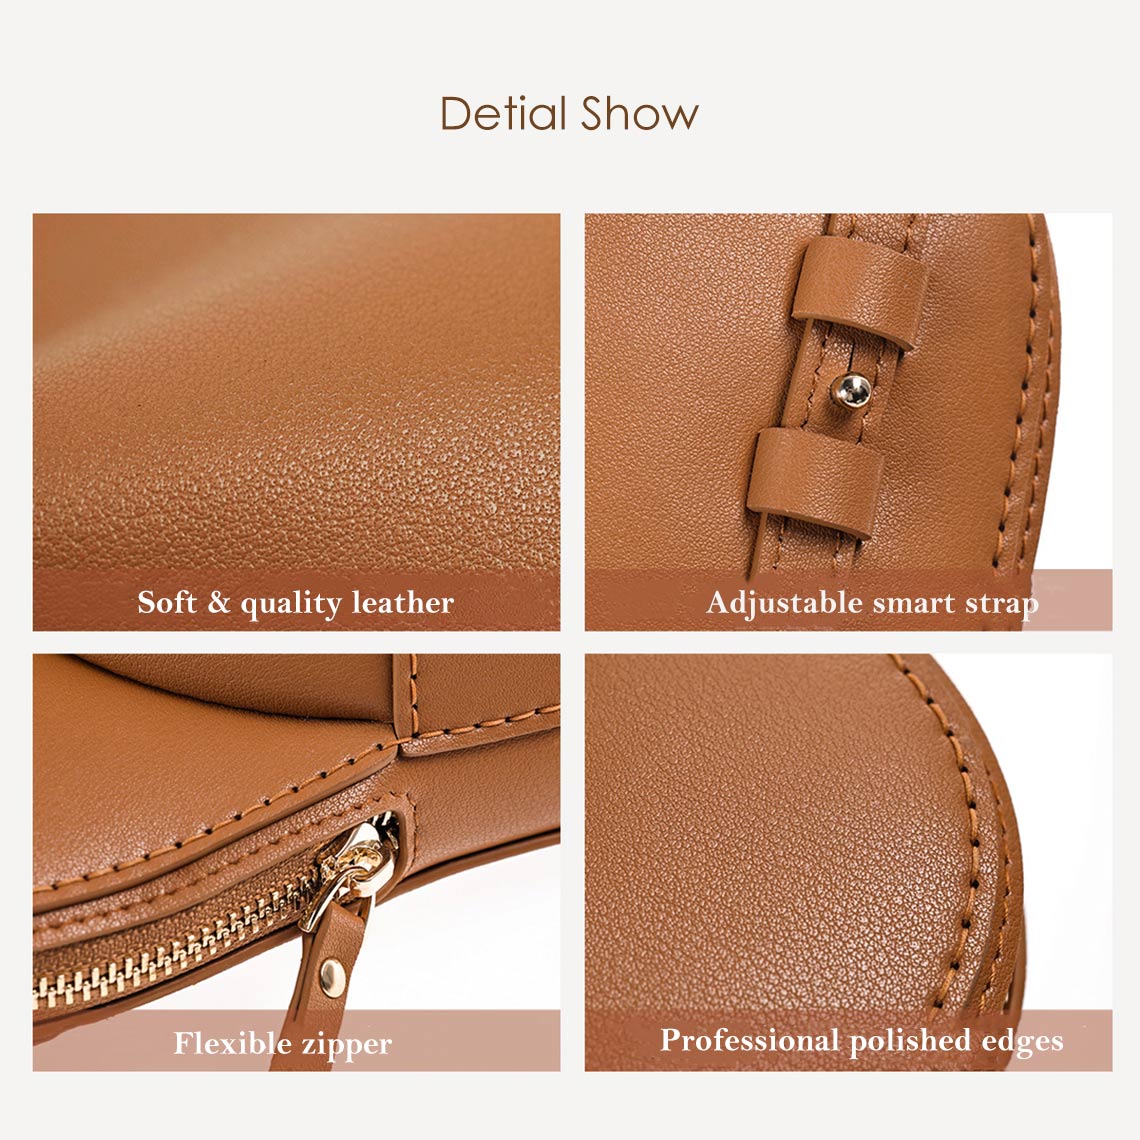 split leather goods | well-made leather bags and leather accessories